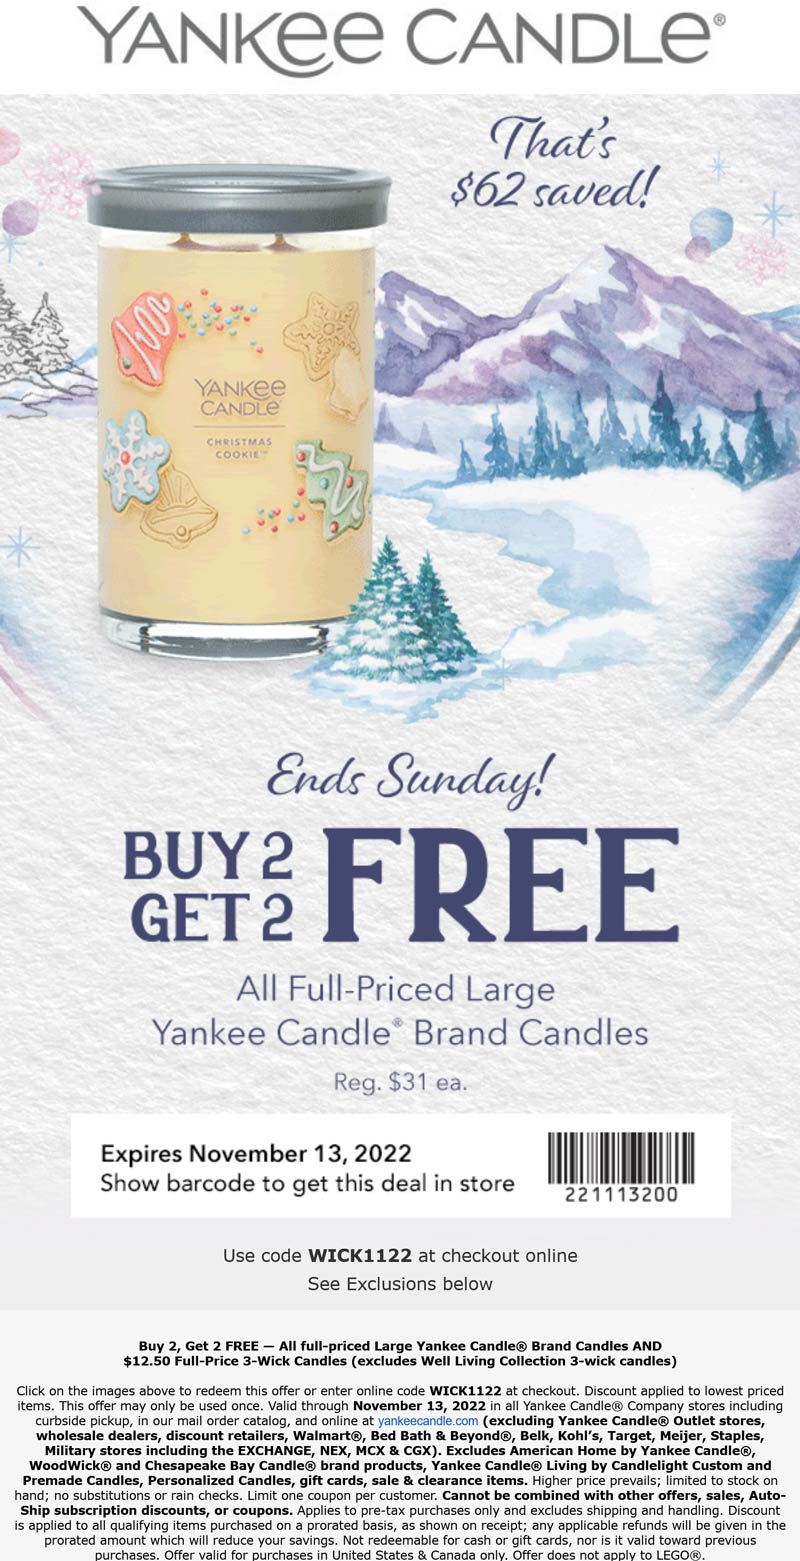 Yankee Candle stores Coupon  4-for-2 on candles at Yankee Candle, or online via promo code WICK1122 #yankeecandle 